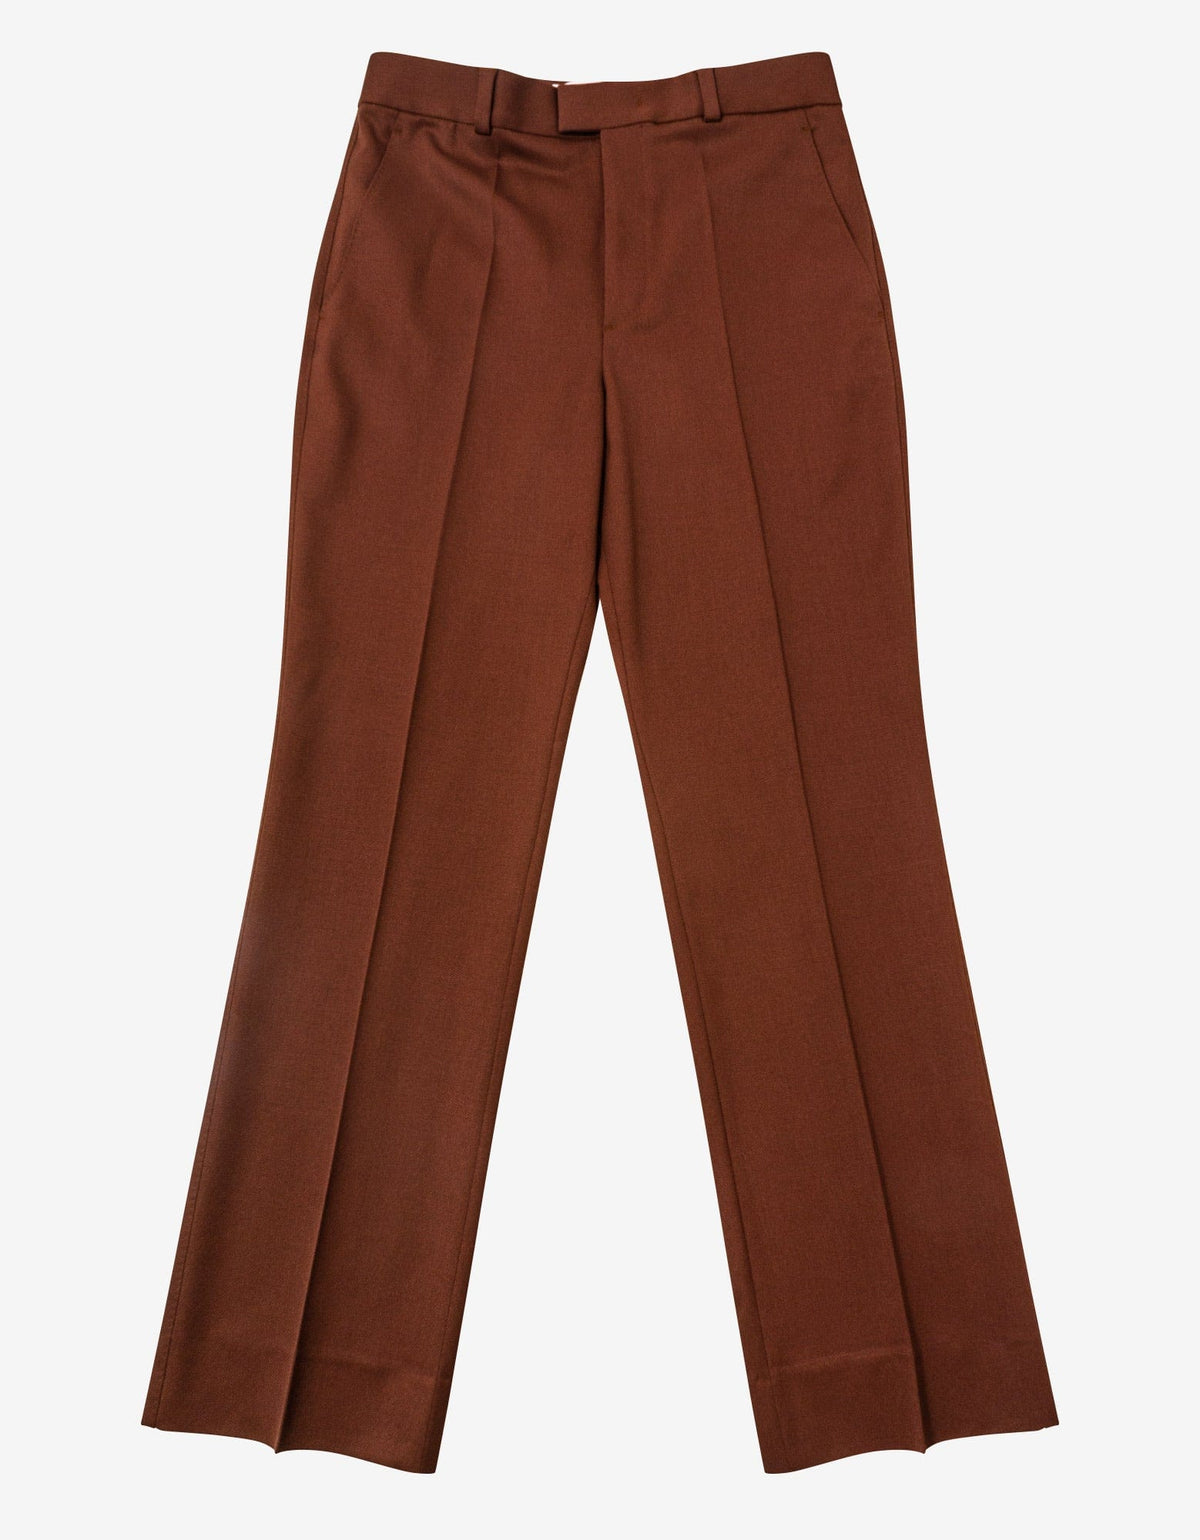 Valentino Brown Wool Trousers